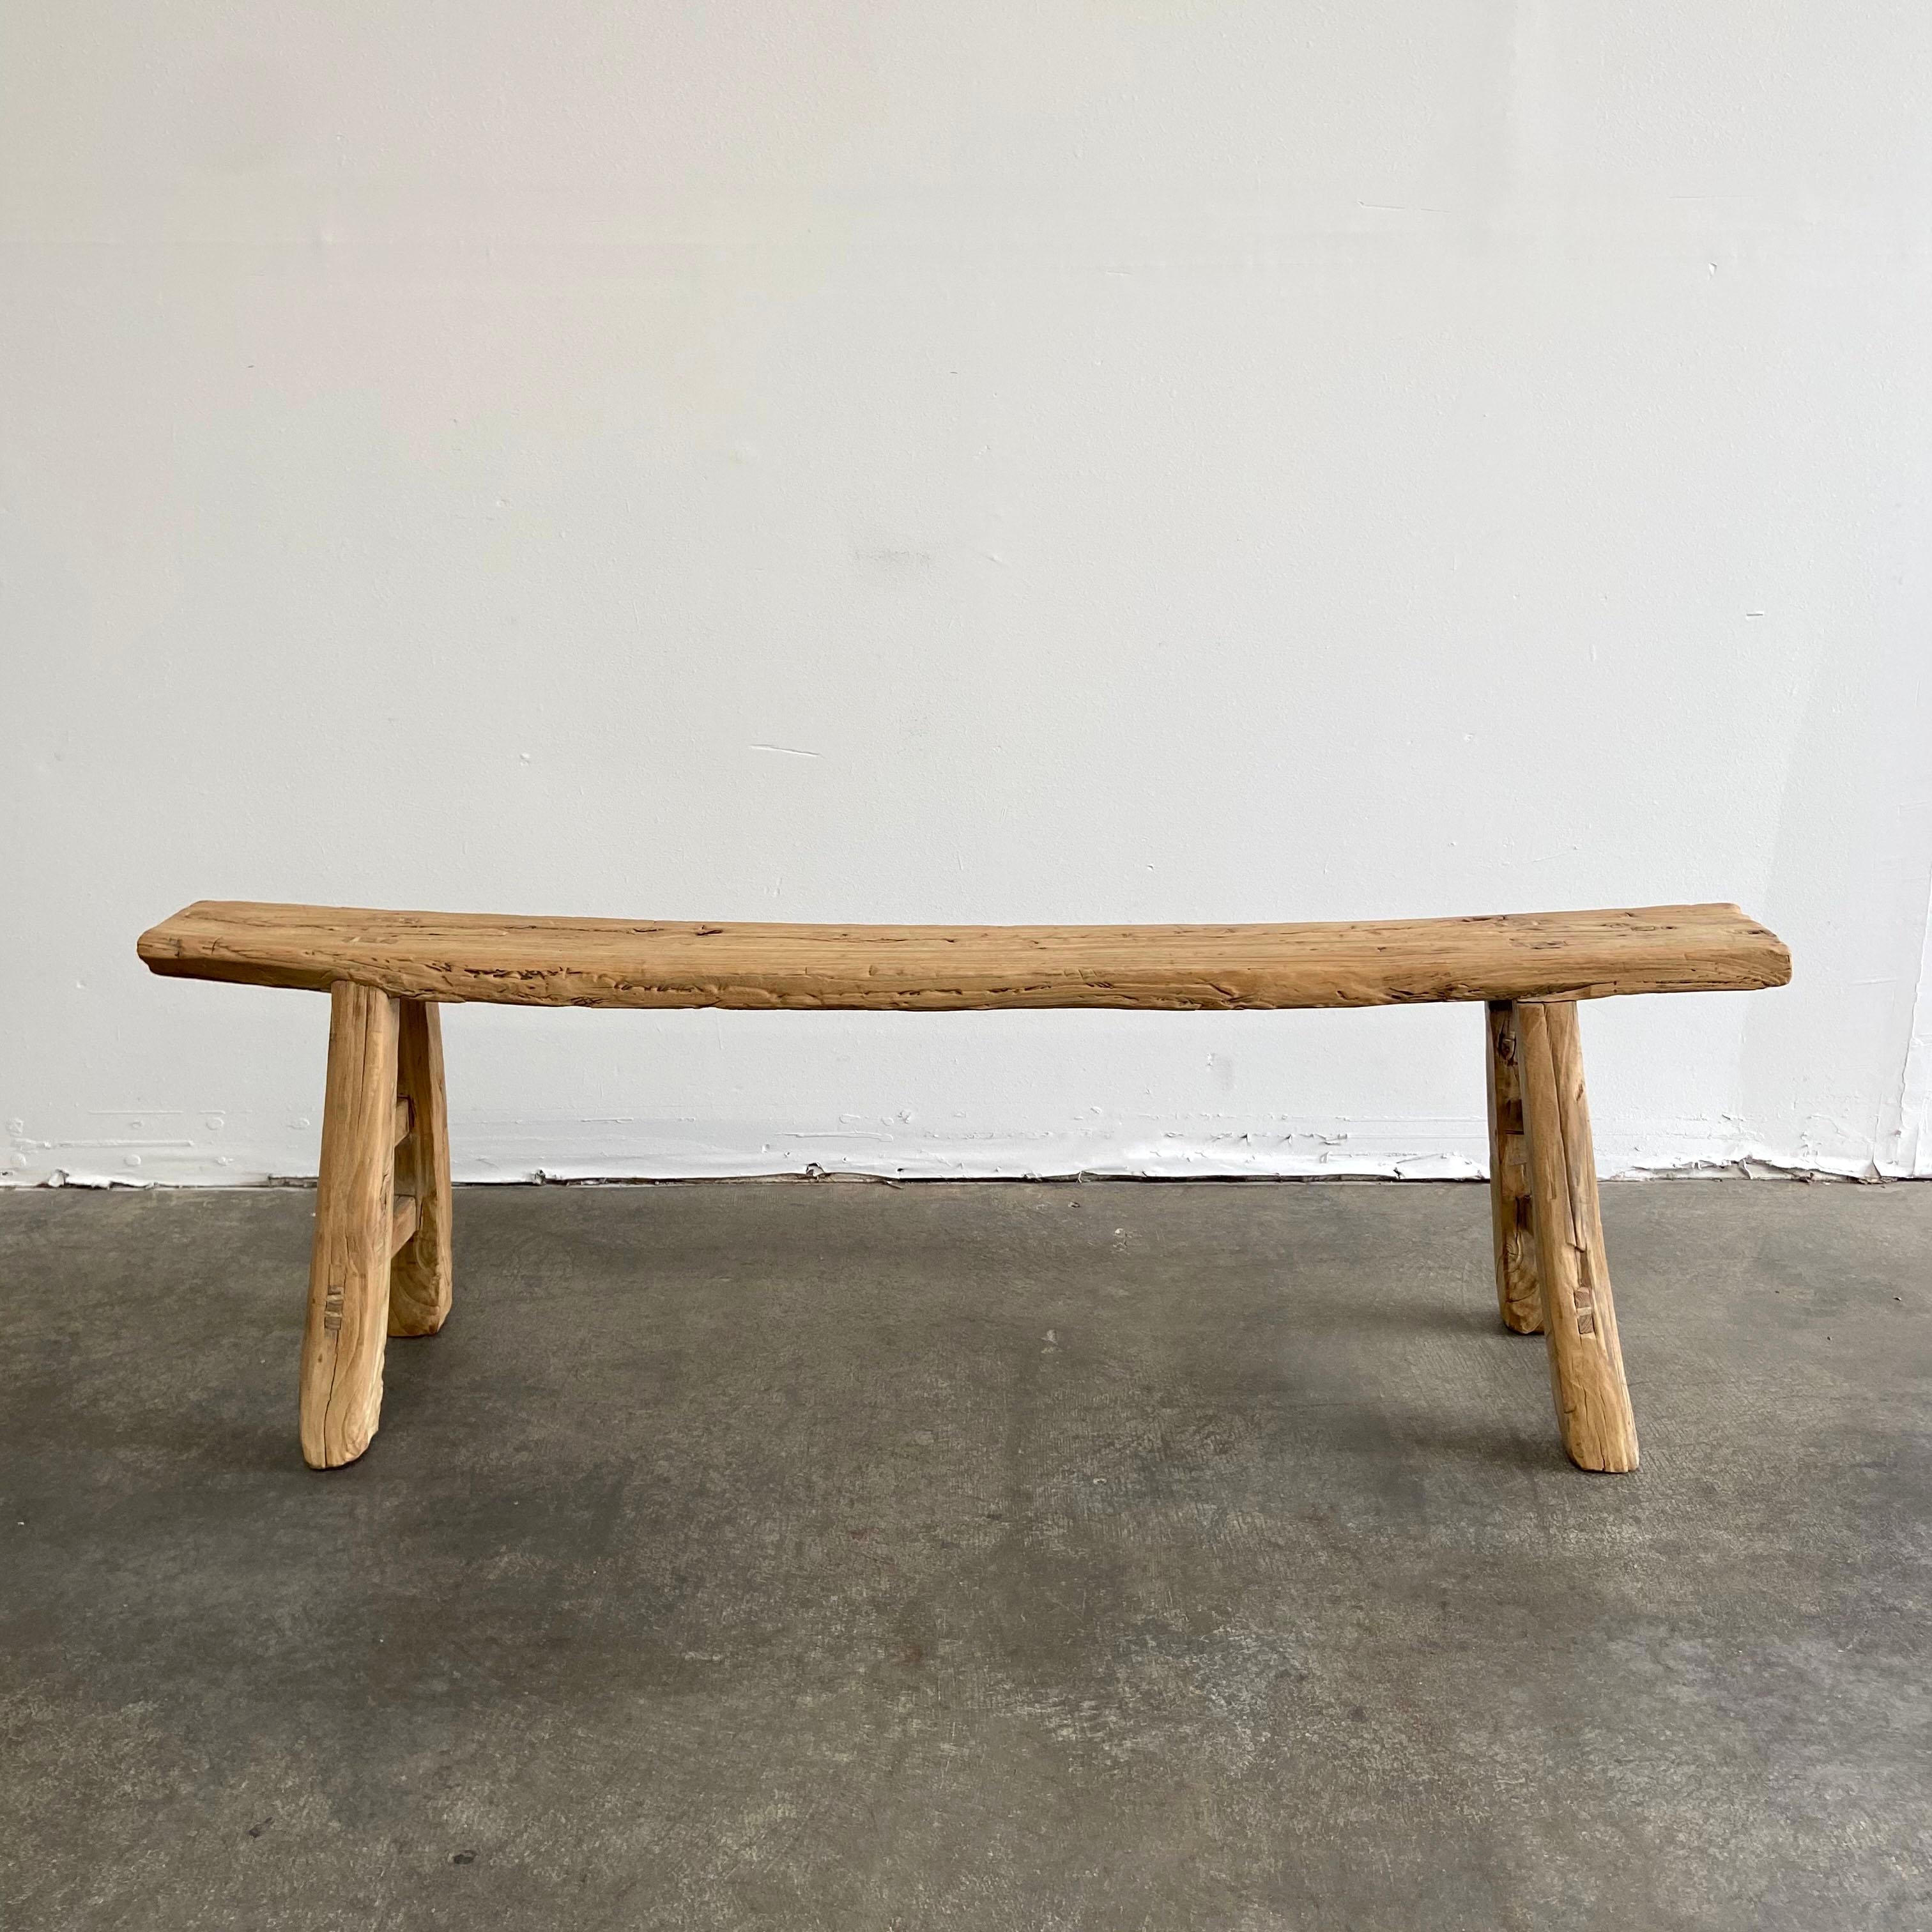 Skinny bench vintage antique elm wood bench.
These are the real vintage antique elm wood benches! Beautiful antique patina, with weathering and age, these are solid and sturdy ready for daily use, use as a table behind a sofa, stool, coffee table,